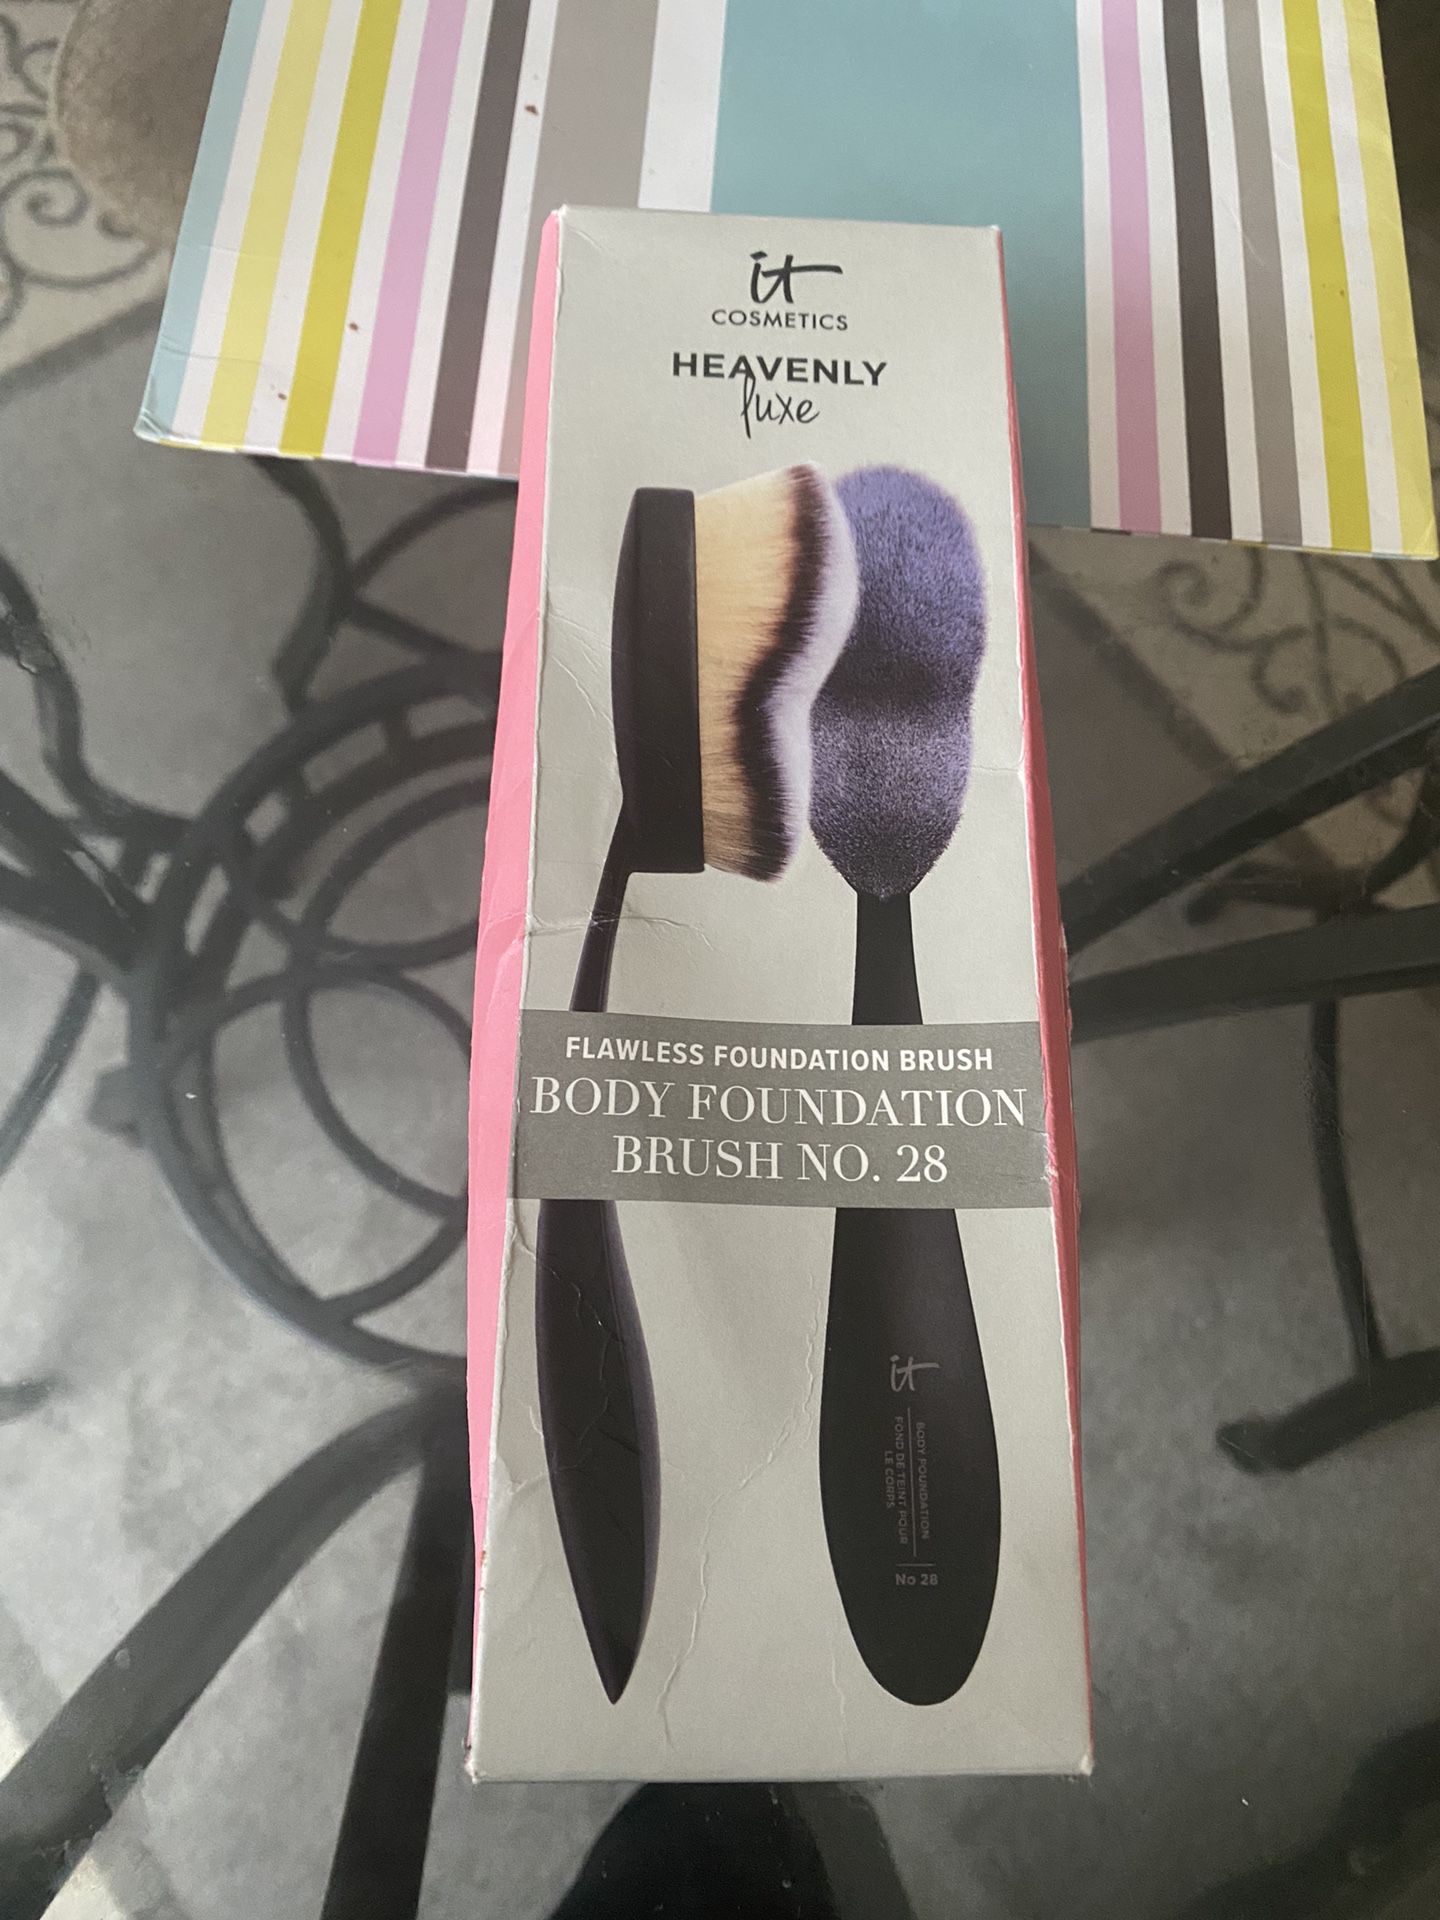 HEAVENLY LUXE BODY FOUNDATION BRUSH #28